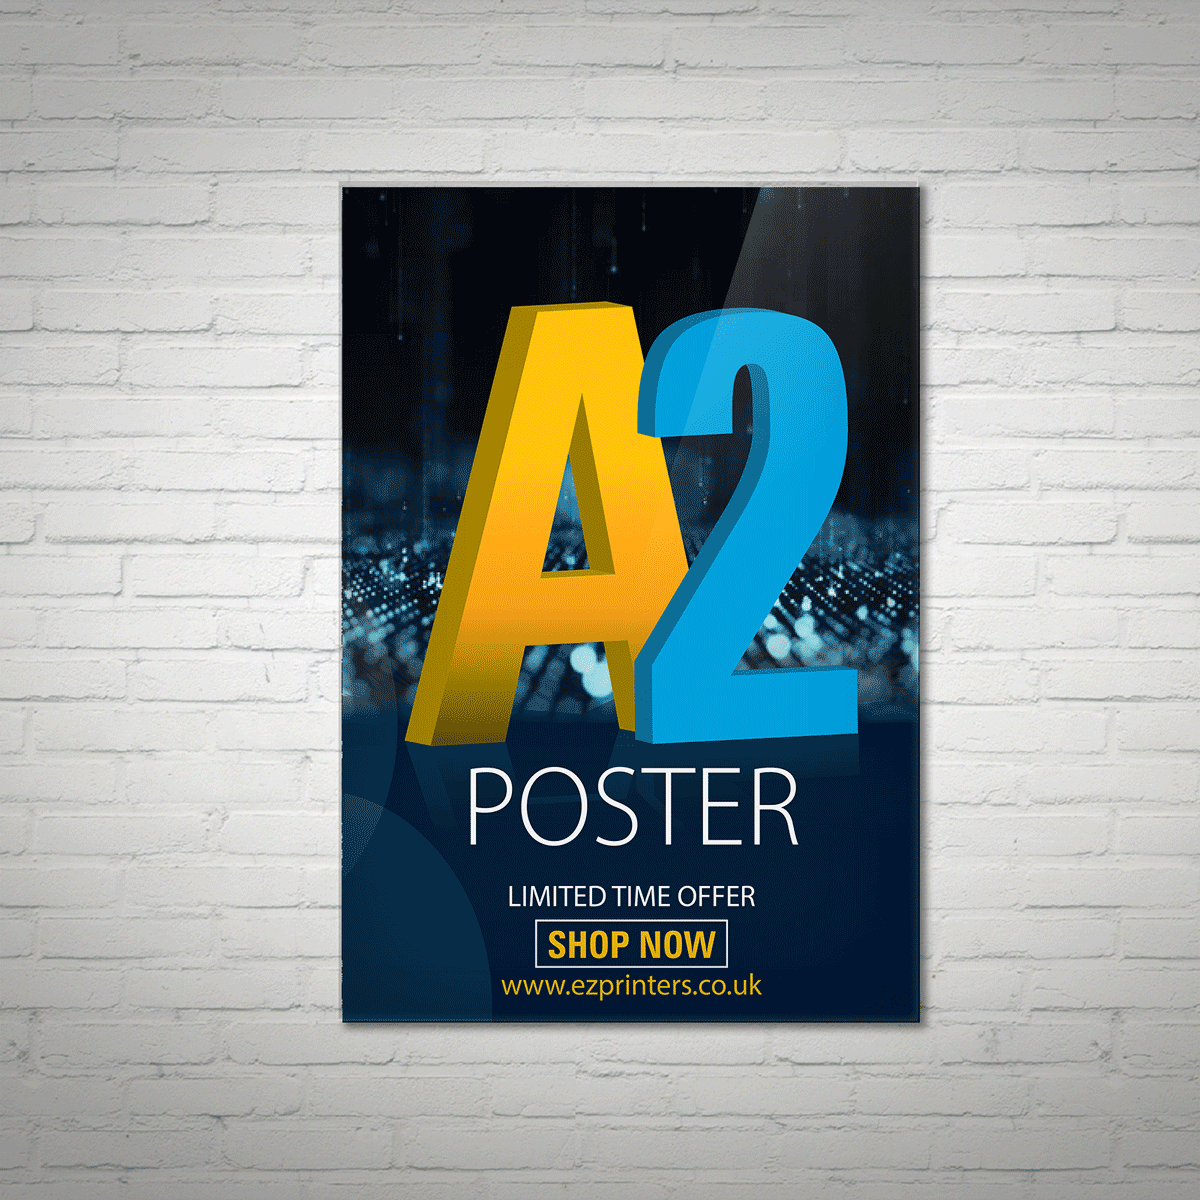 cheap_instant_last_minute_quality_hi_gloss_a2_poster_printing_shop_in_east_london_e1_brick_lane